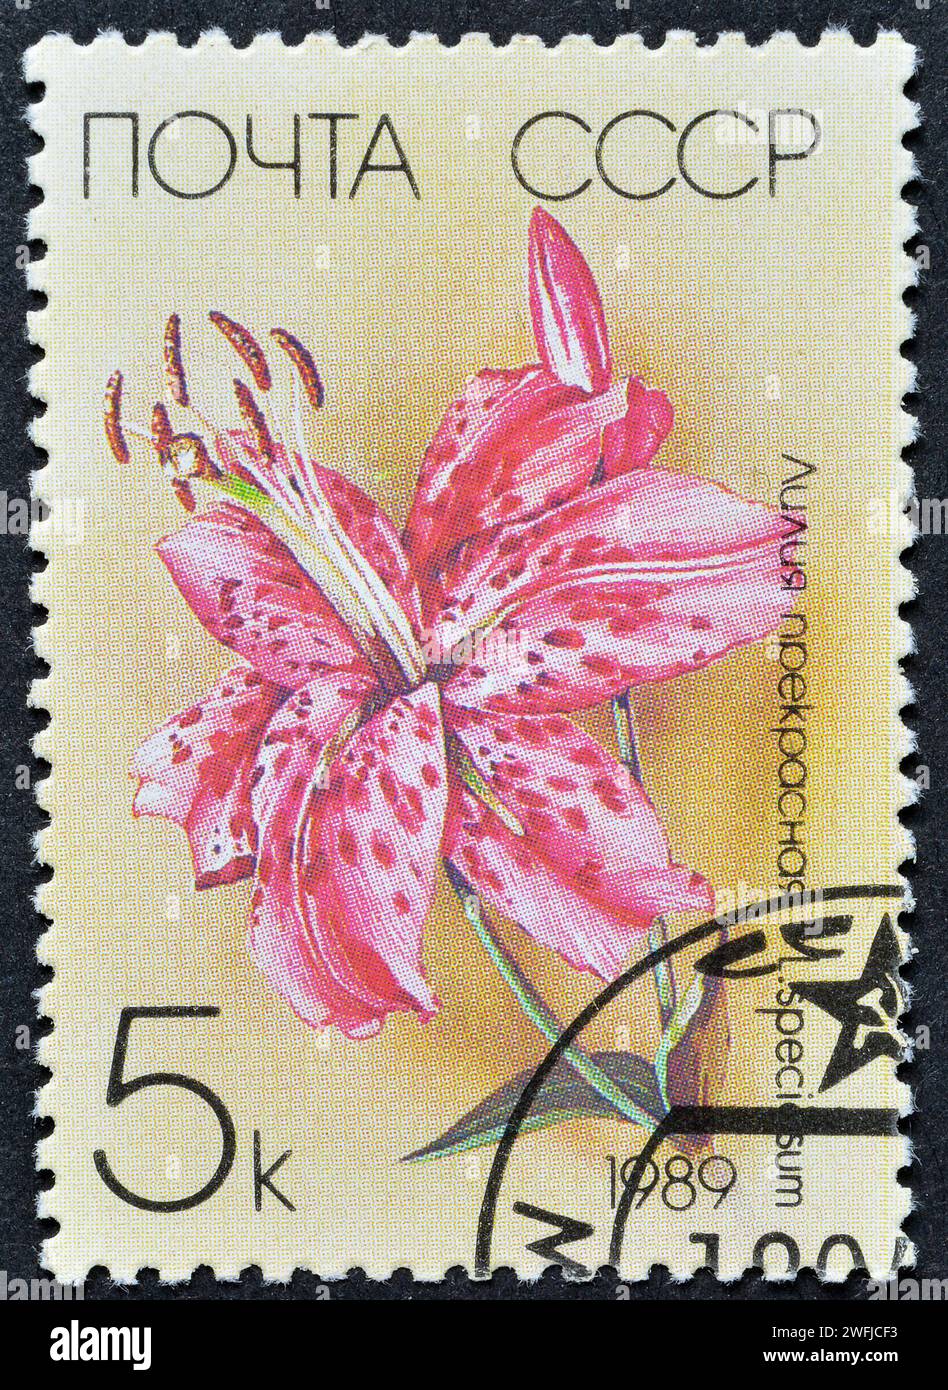 Cancelled postage stamp printed by Soviet Union, that shows Japanese Lily (Lilium speciosum), Garden Lilies, circa 1989. Stock Photo